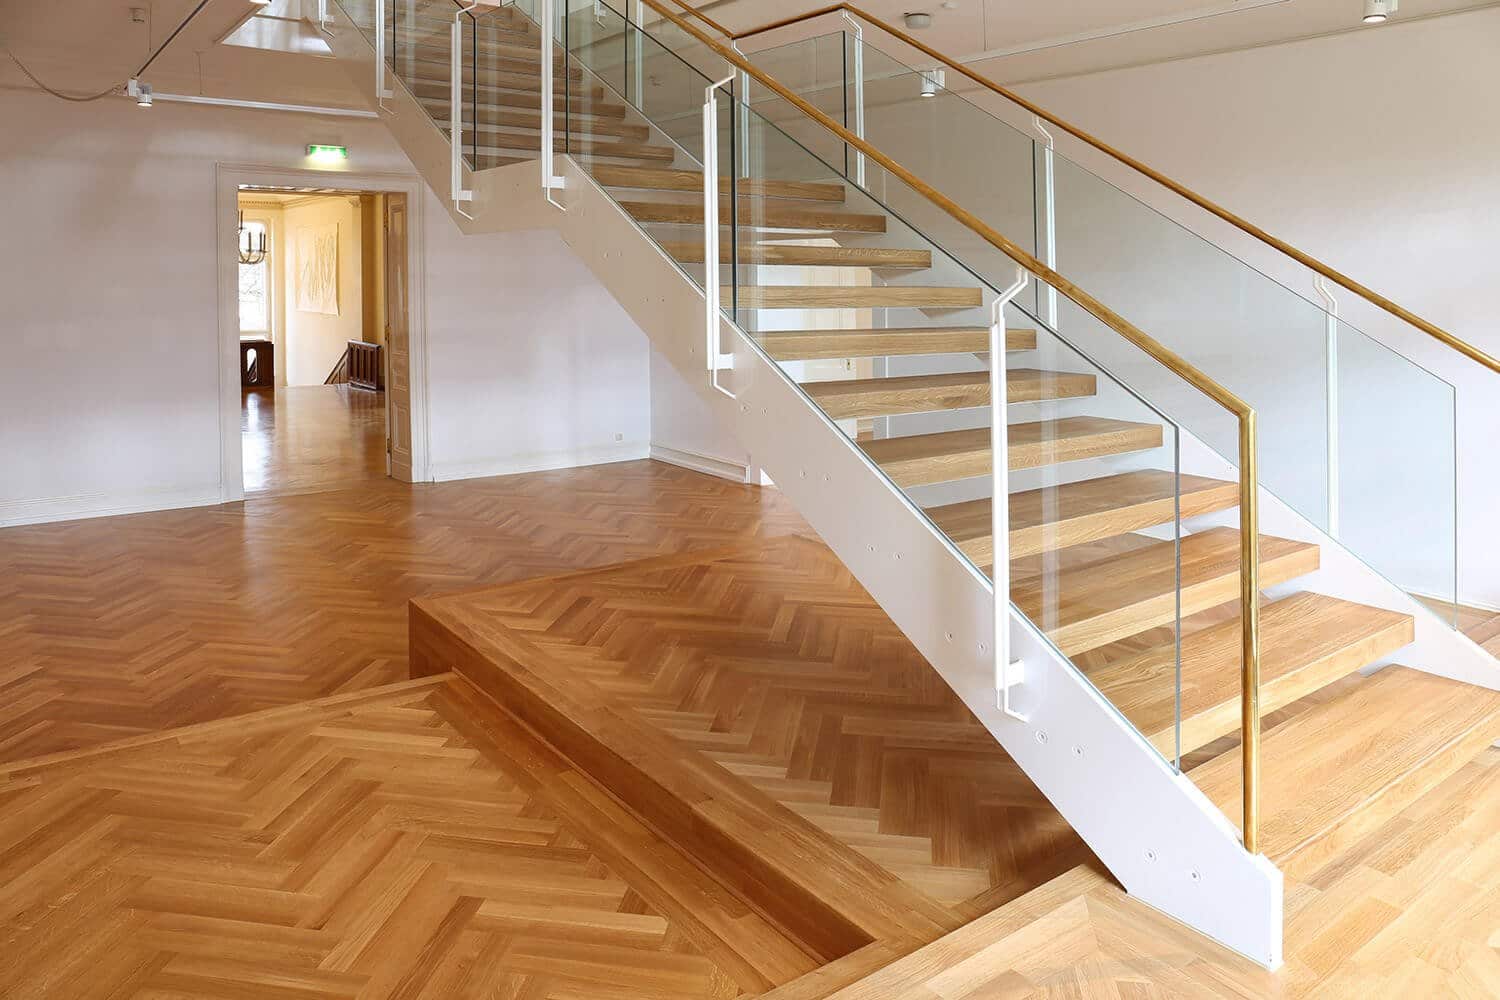 Art museum Villa Zanders with wooden floor and stairs